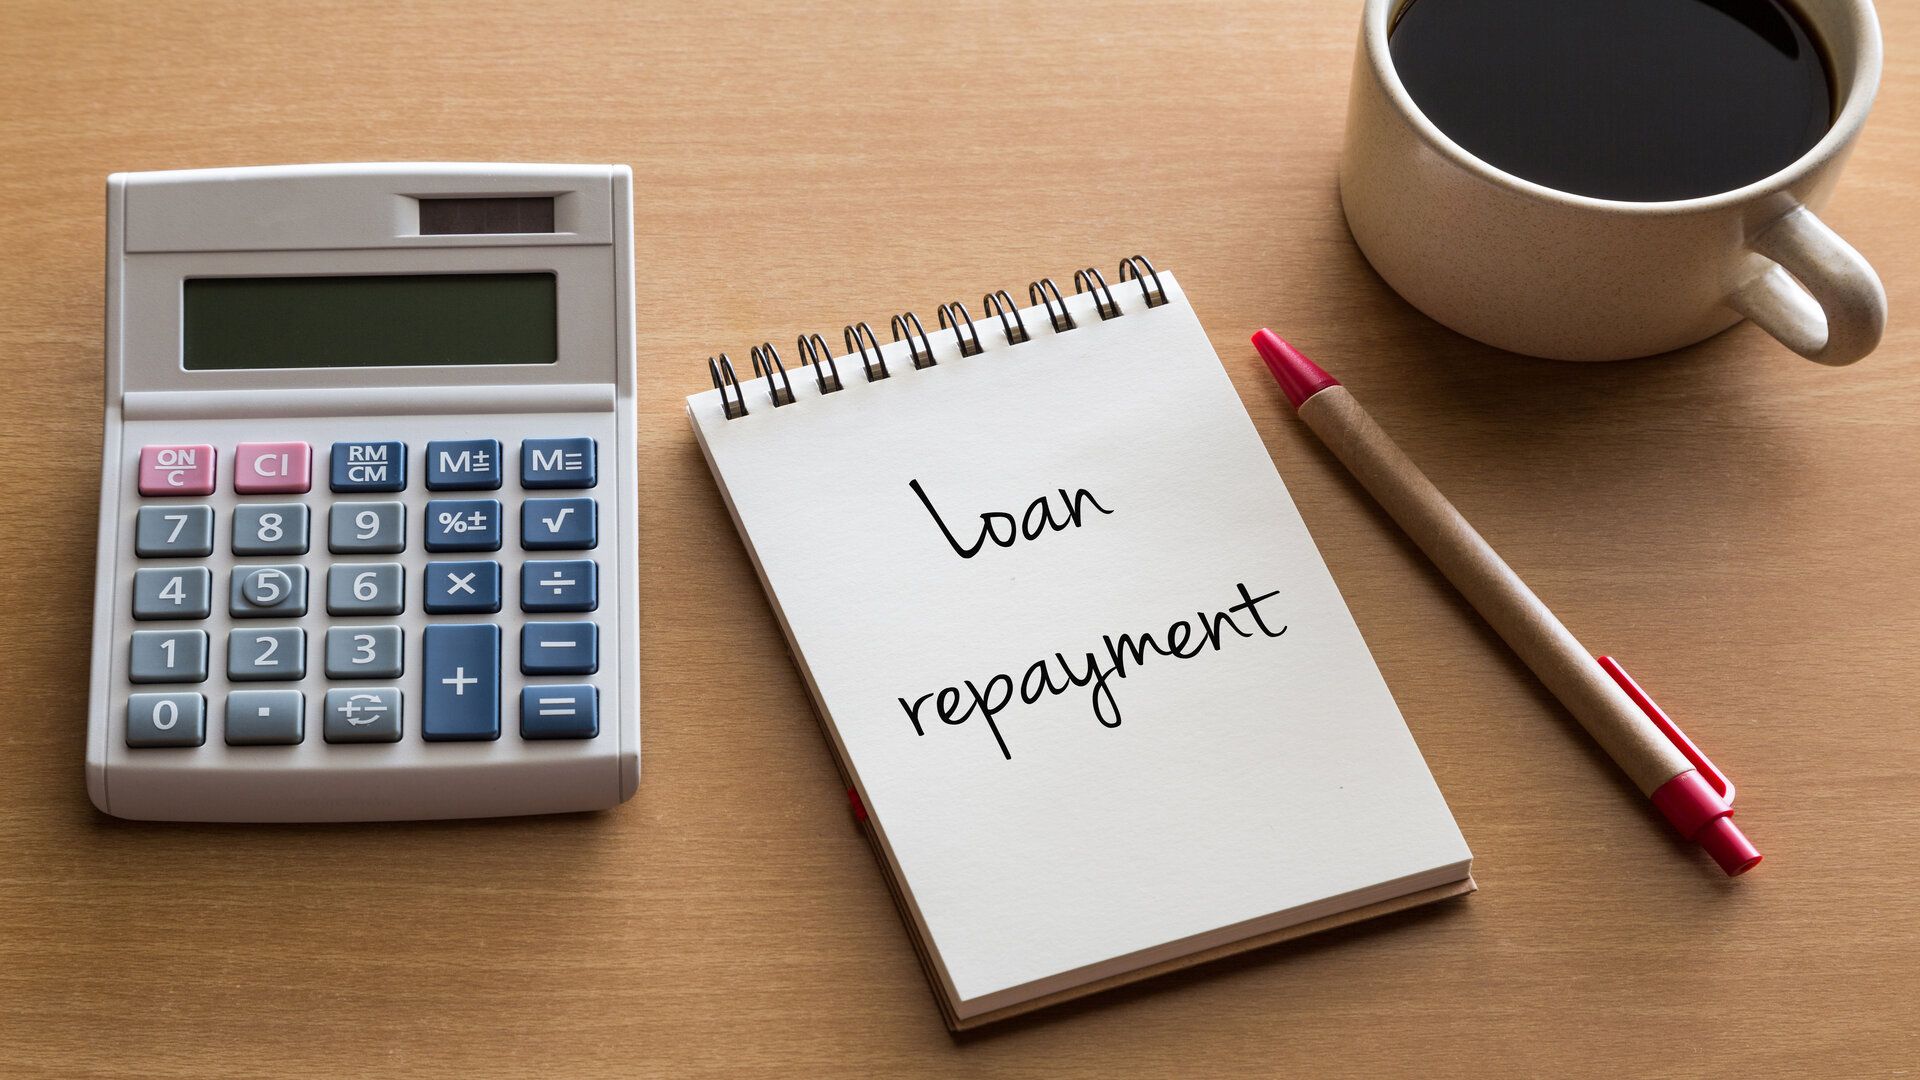 Guide to Loan Repayment - Types, Calculations, & its Importance